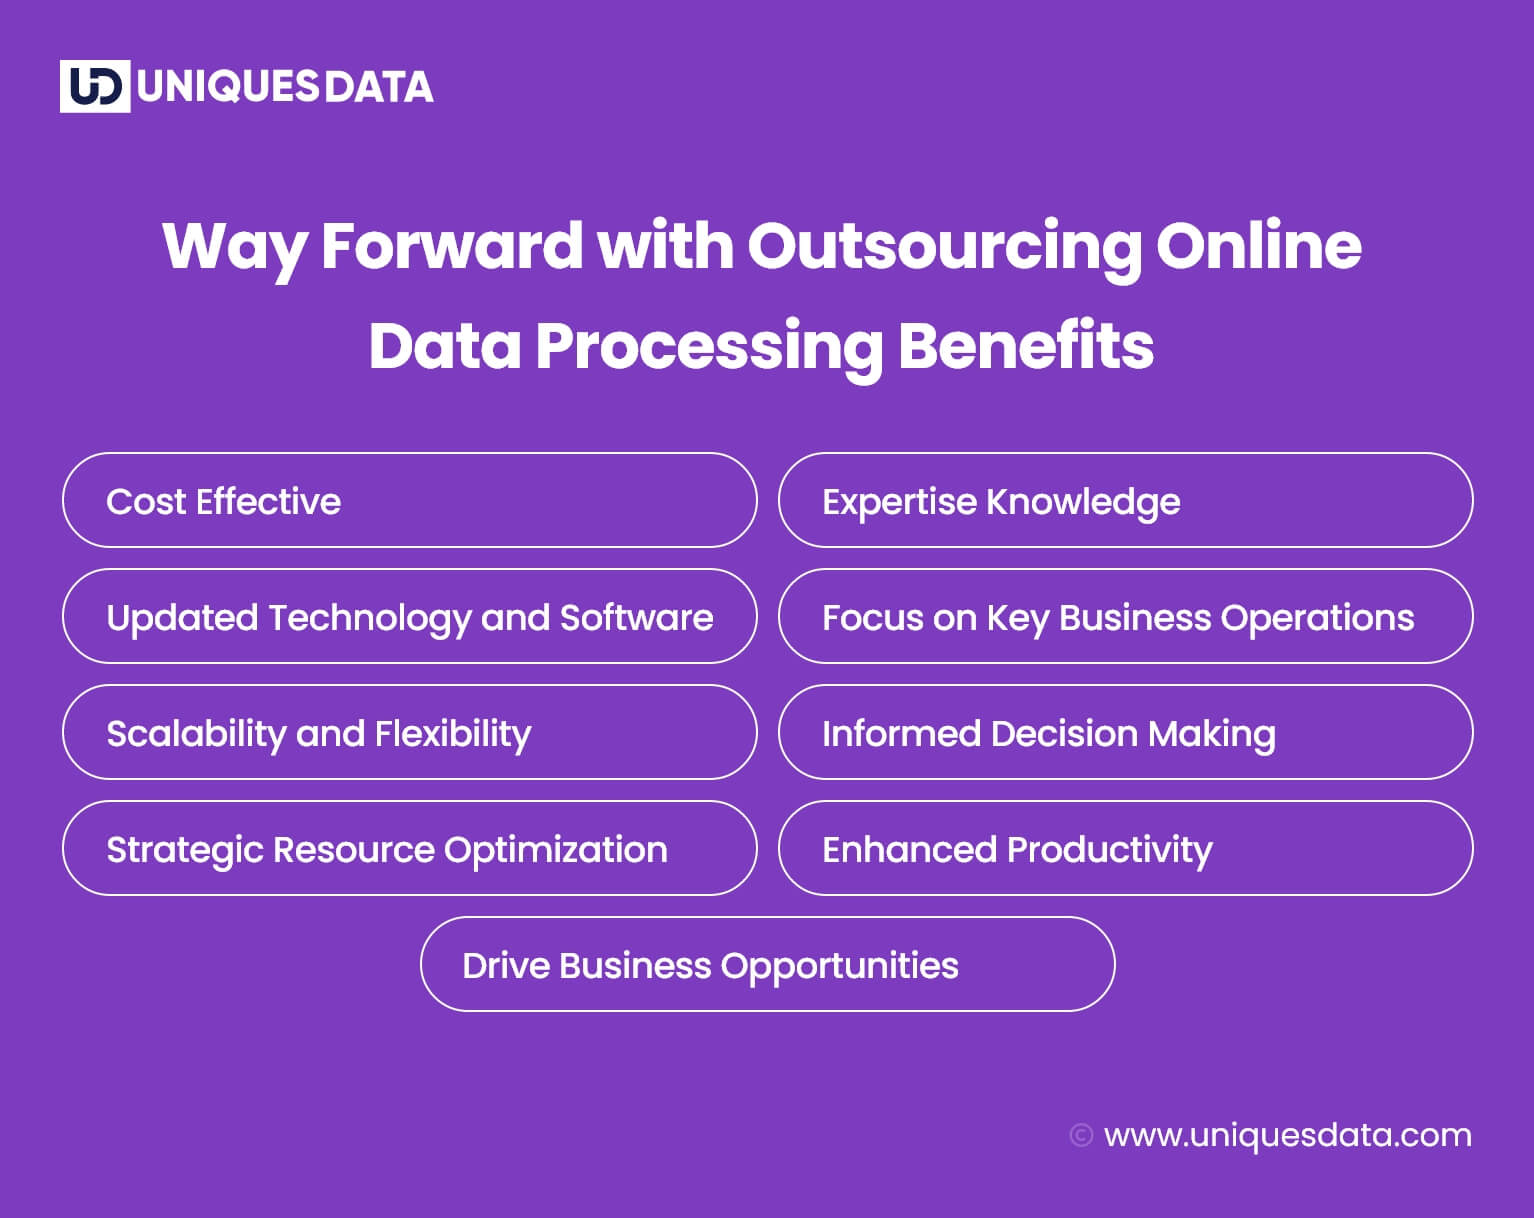 Way Forward with Outsourcing Online Data Processing Benefits